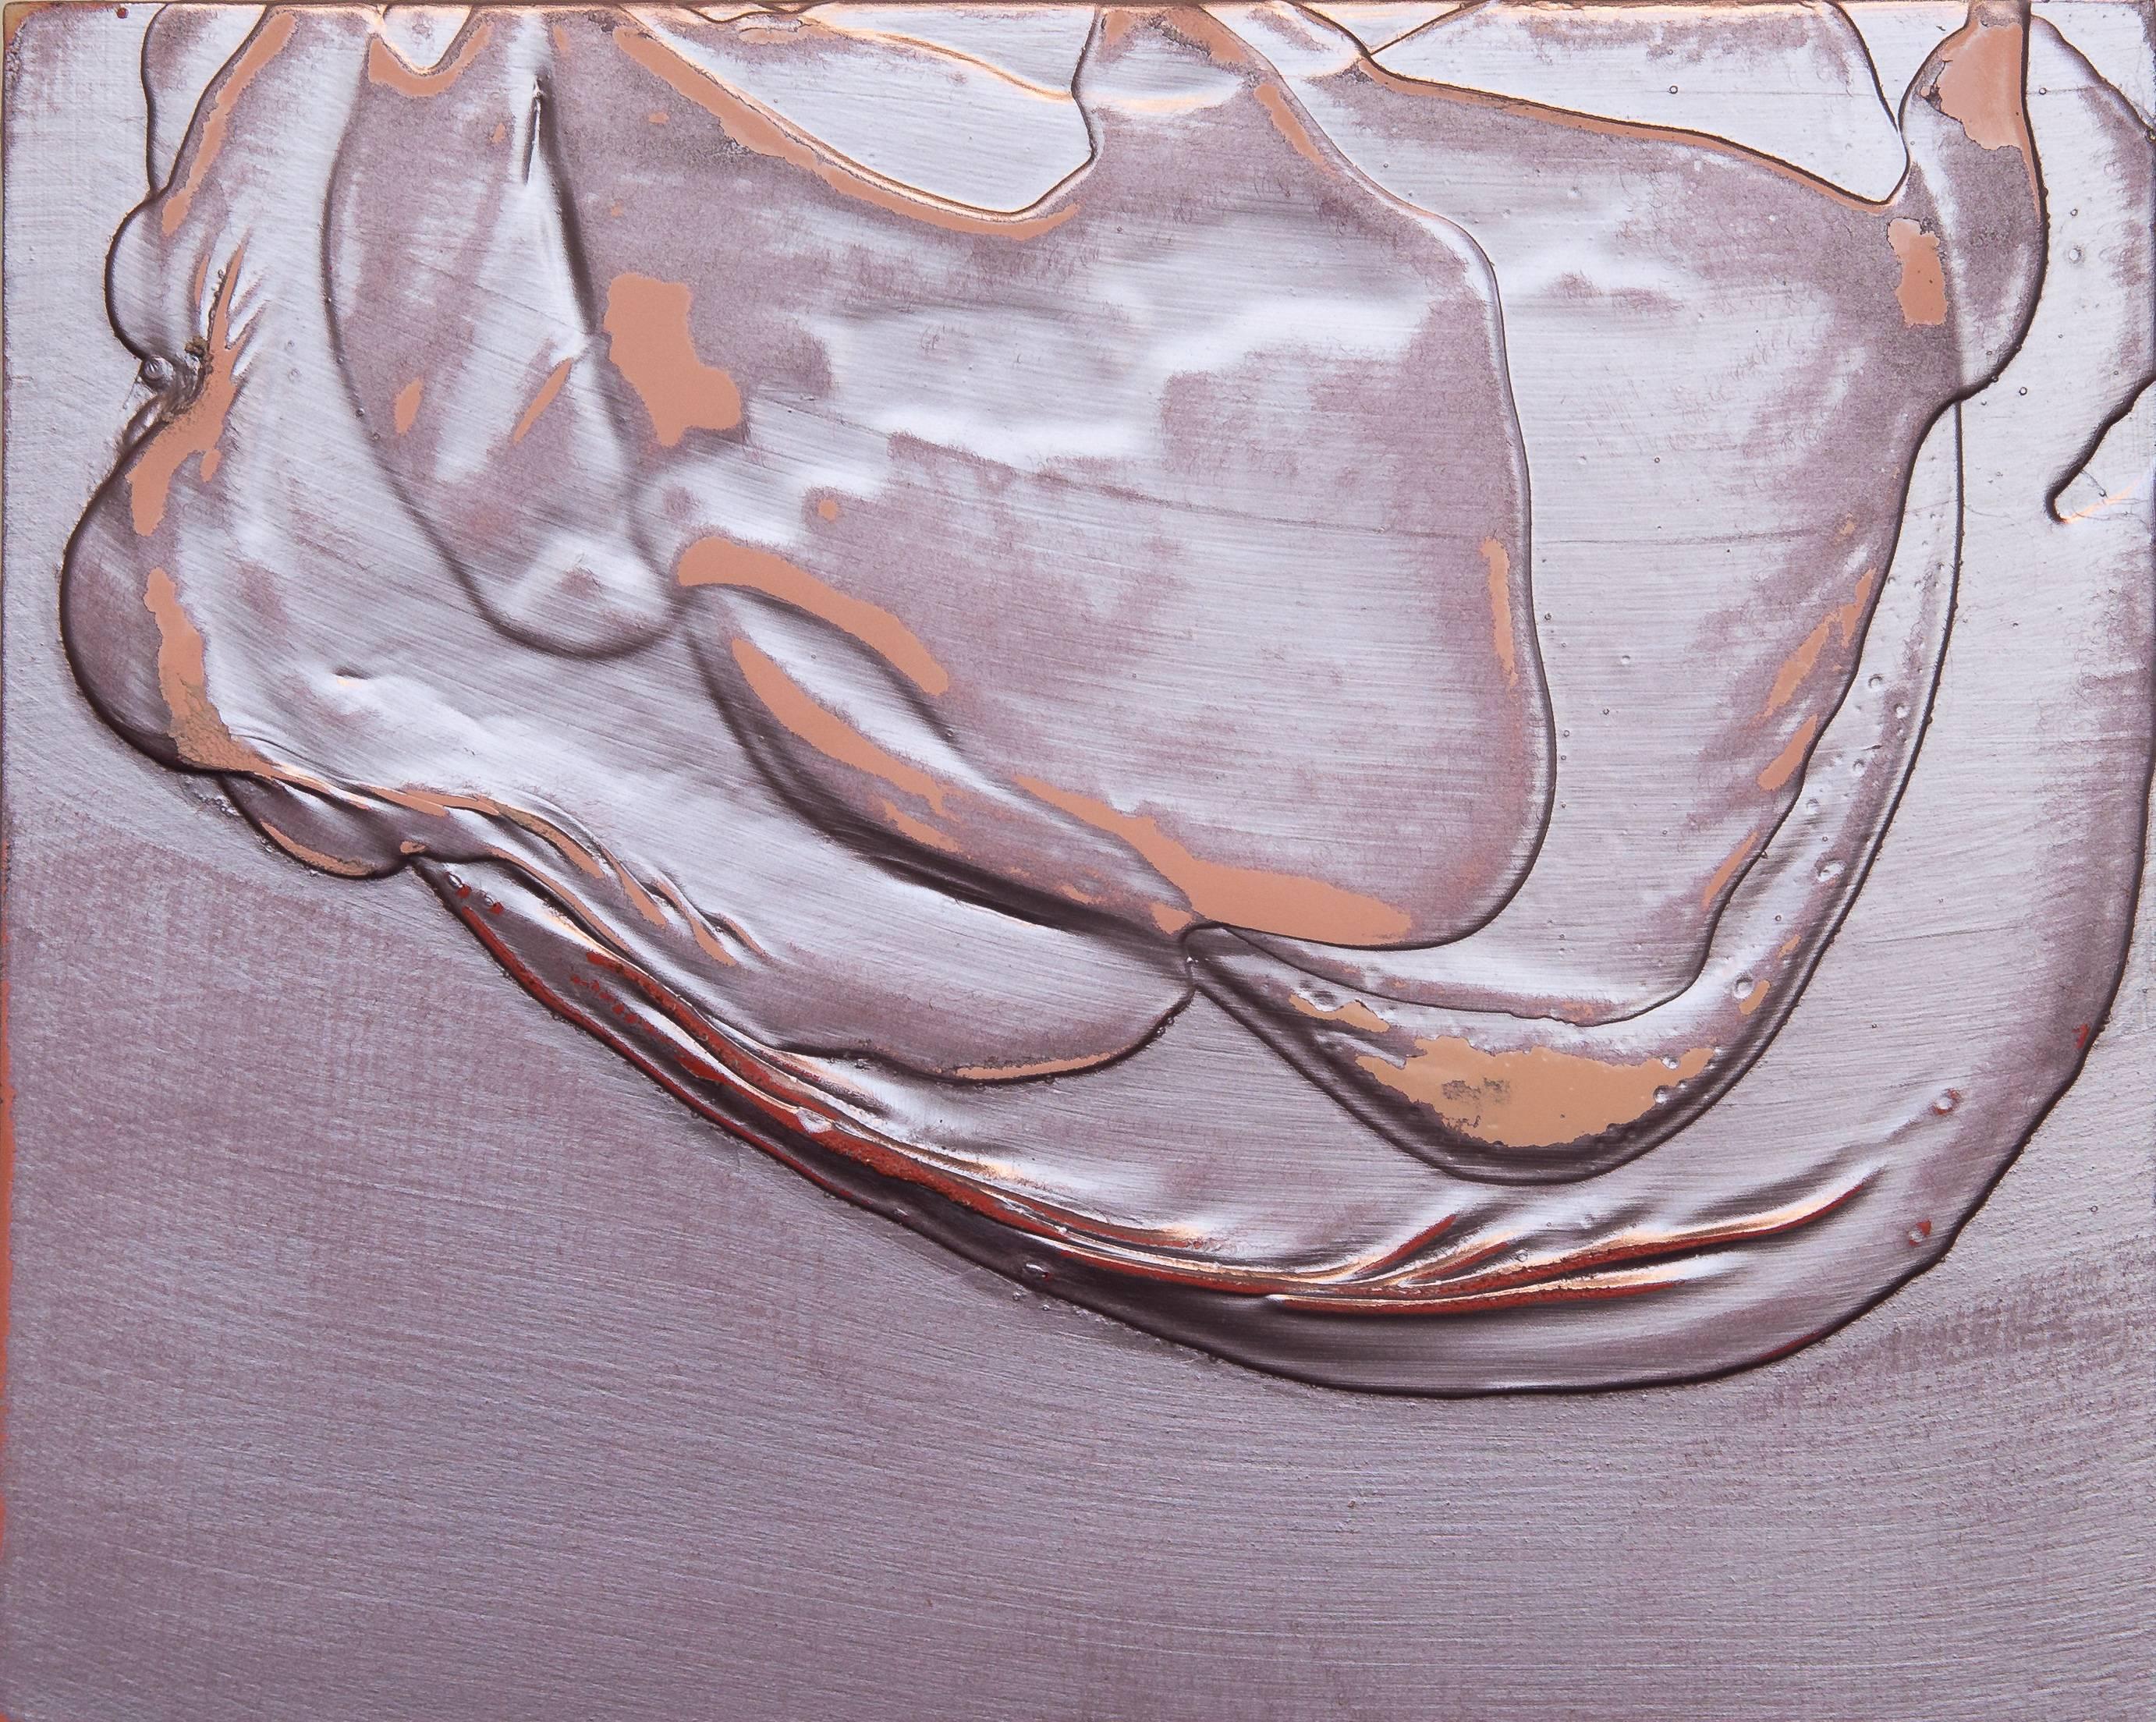 Renee Phillips Abstract Painting - Meditation Study XXIII Textural small abstract pink gold color painting